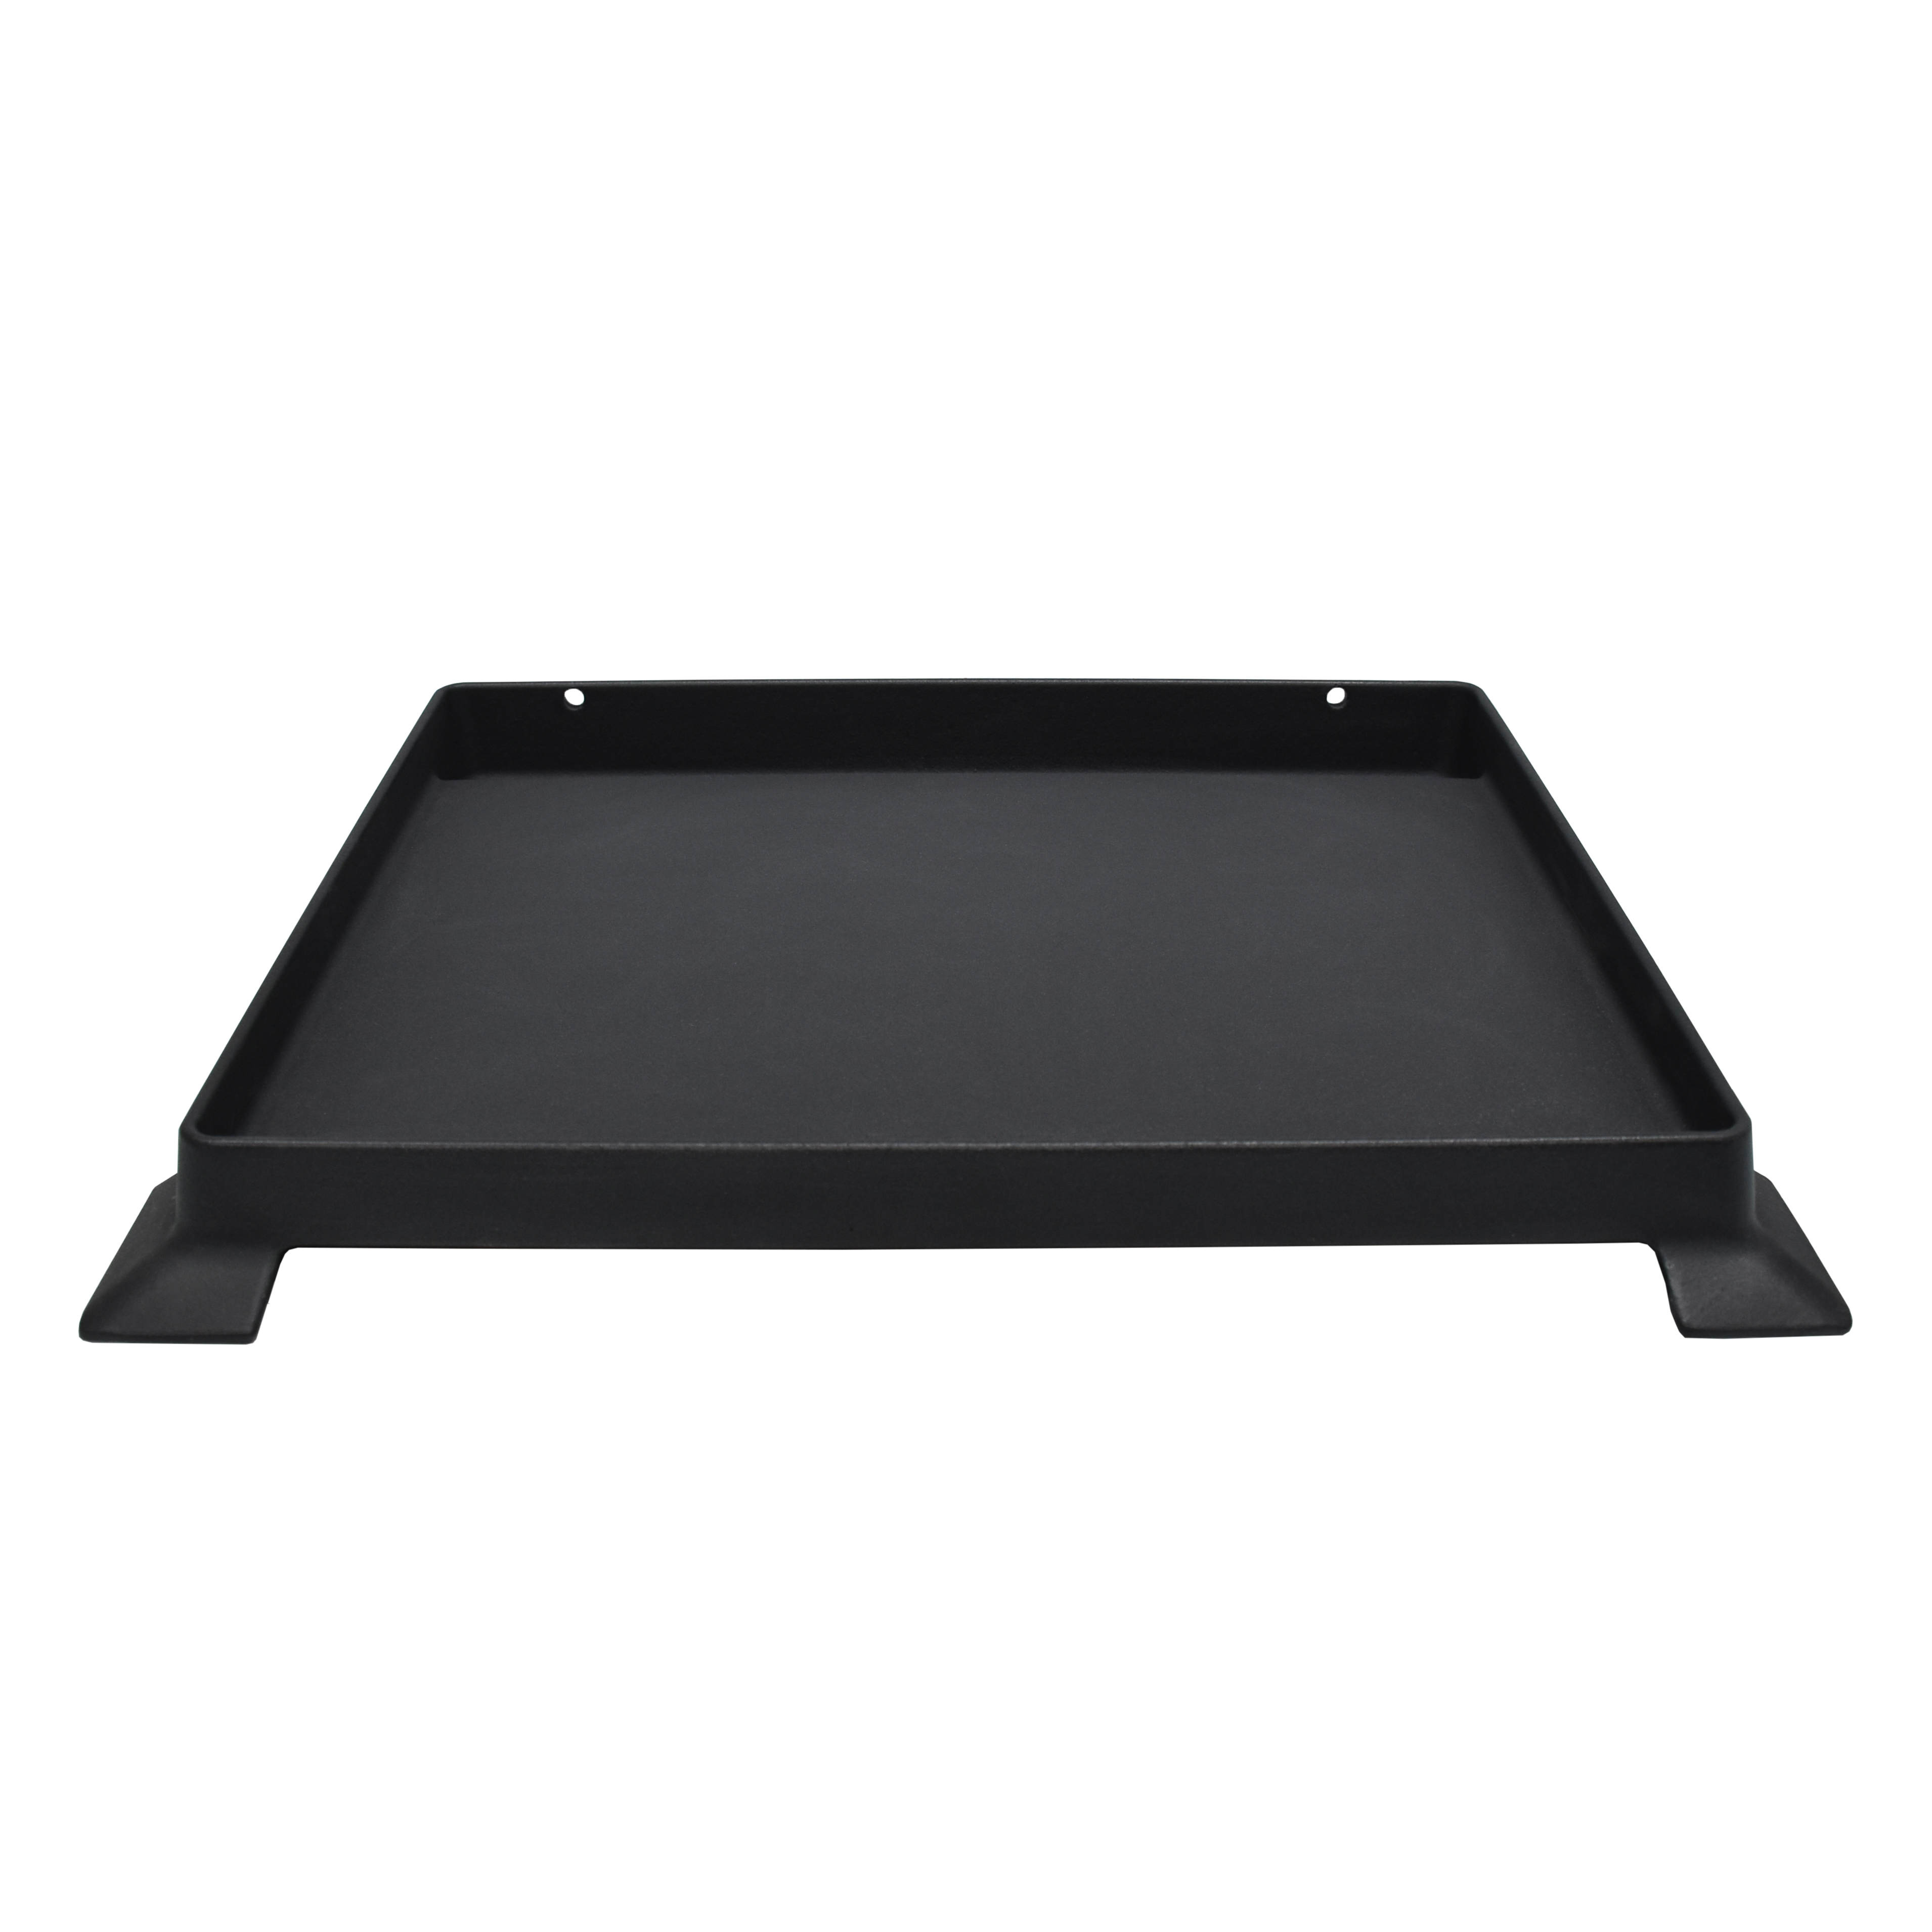 Cuisinart Cast Iron Griddle - image 1 of 7